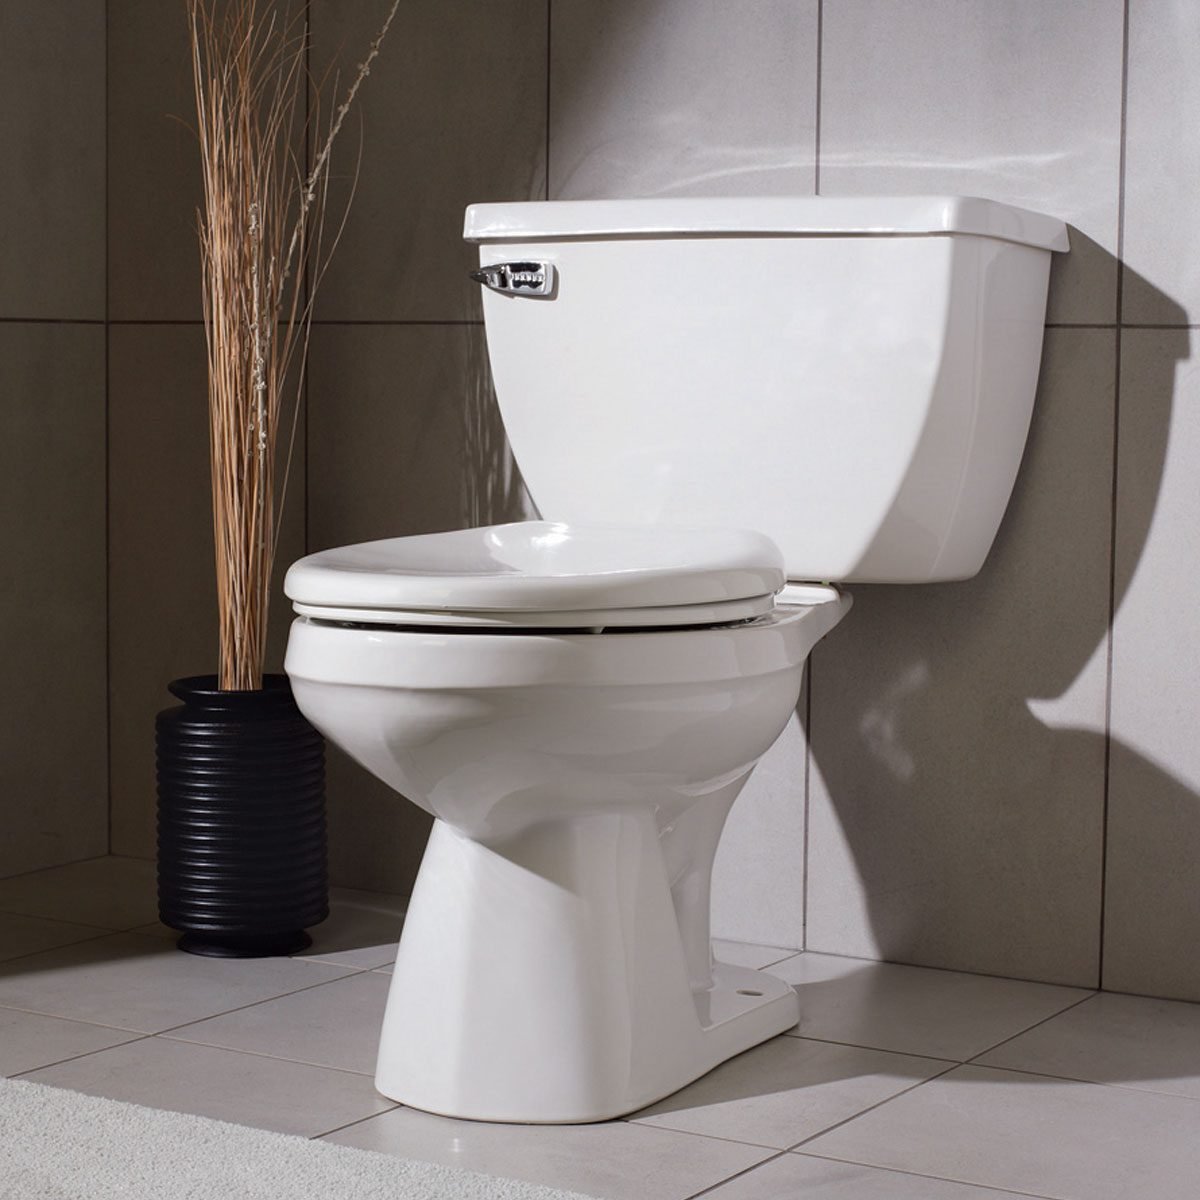 How to Choose the Best Toilet for Your Home